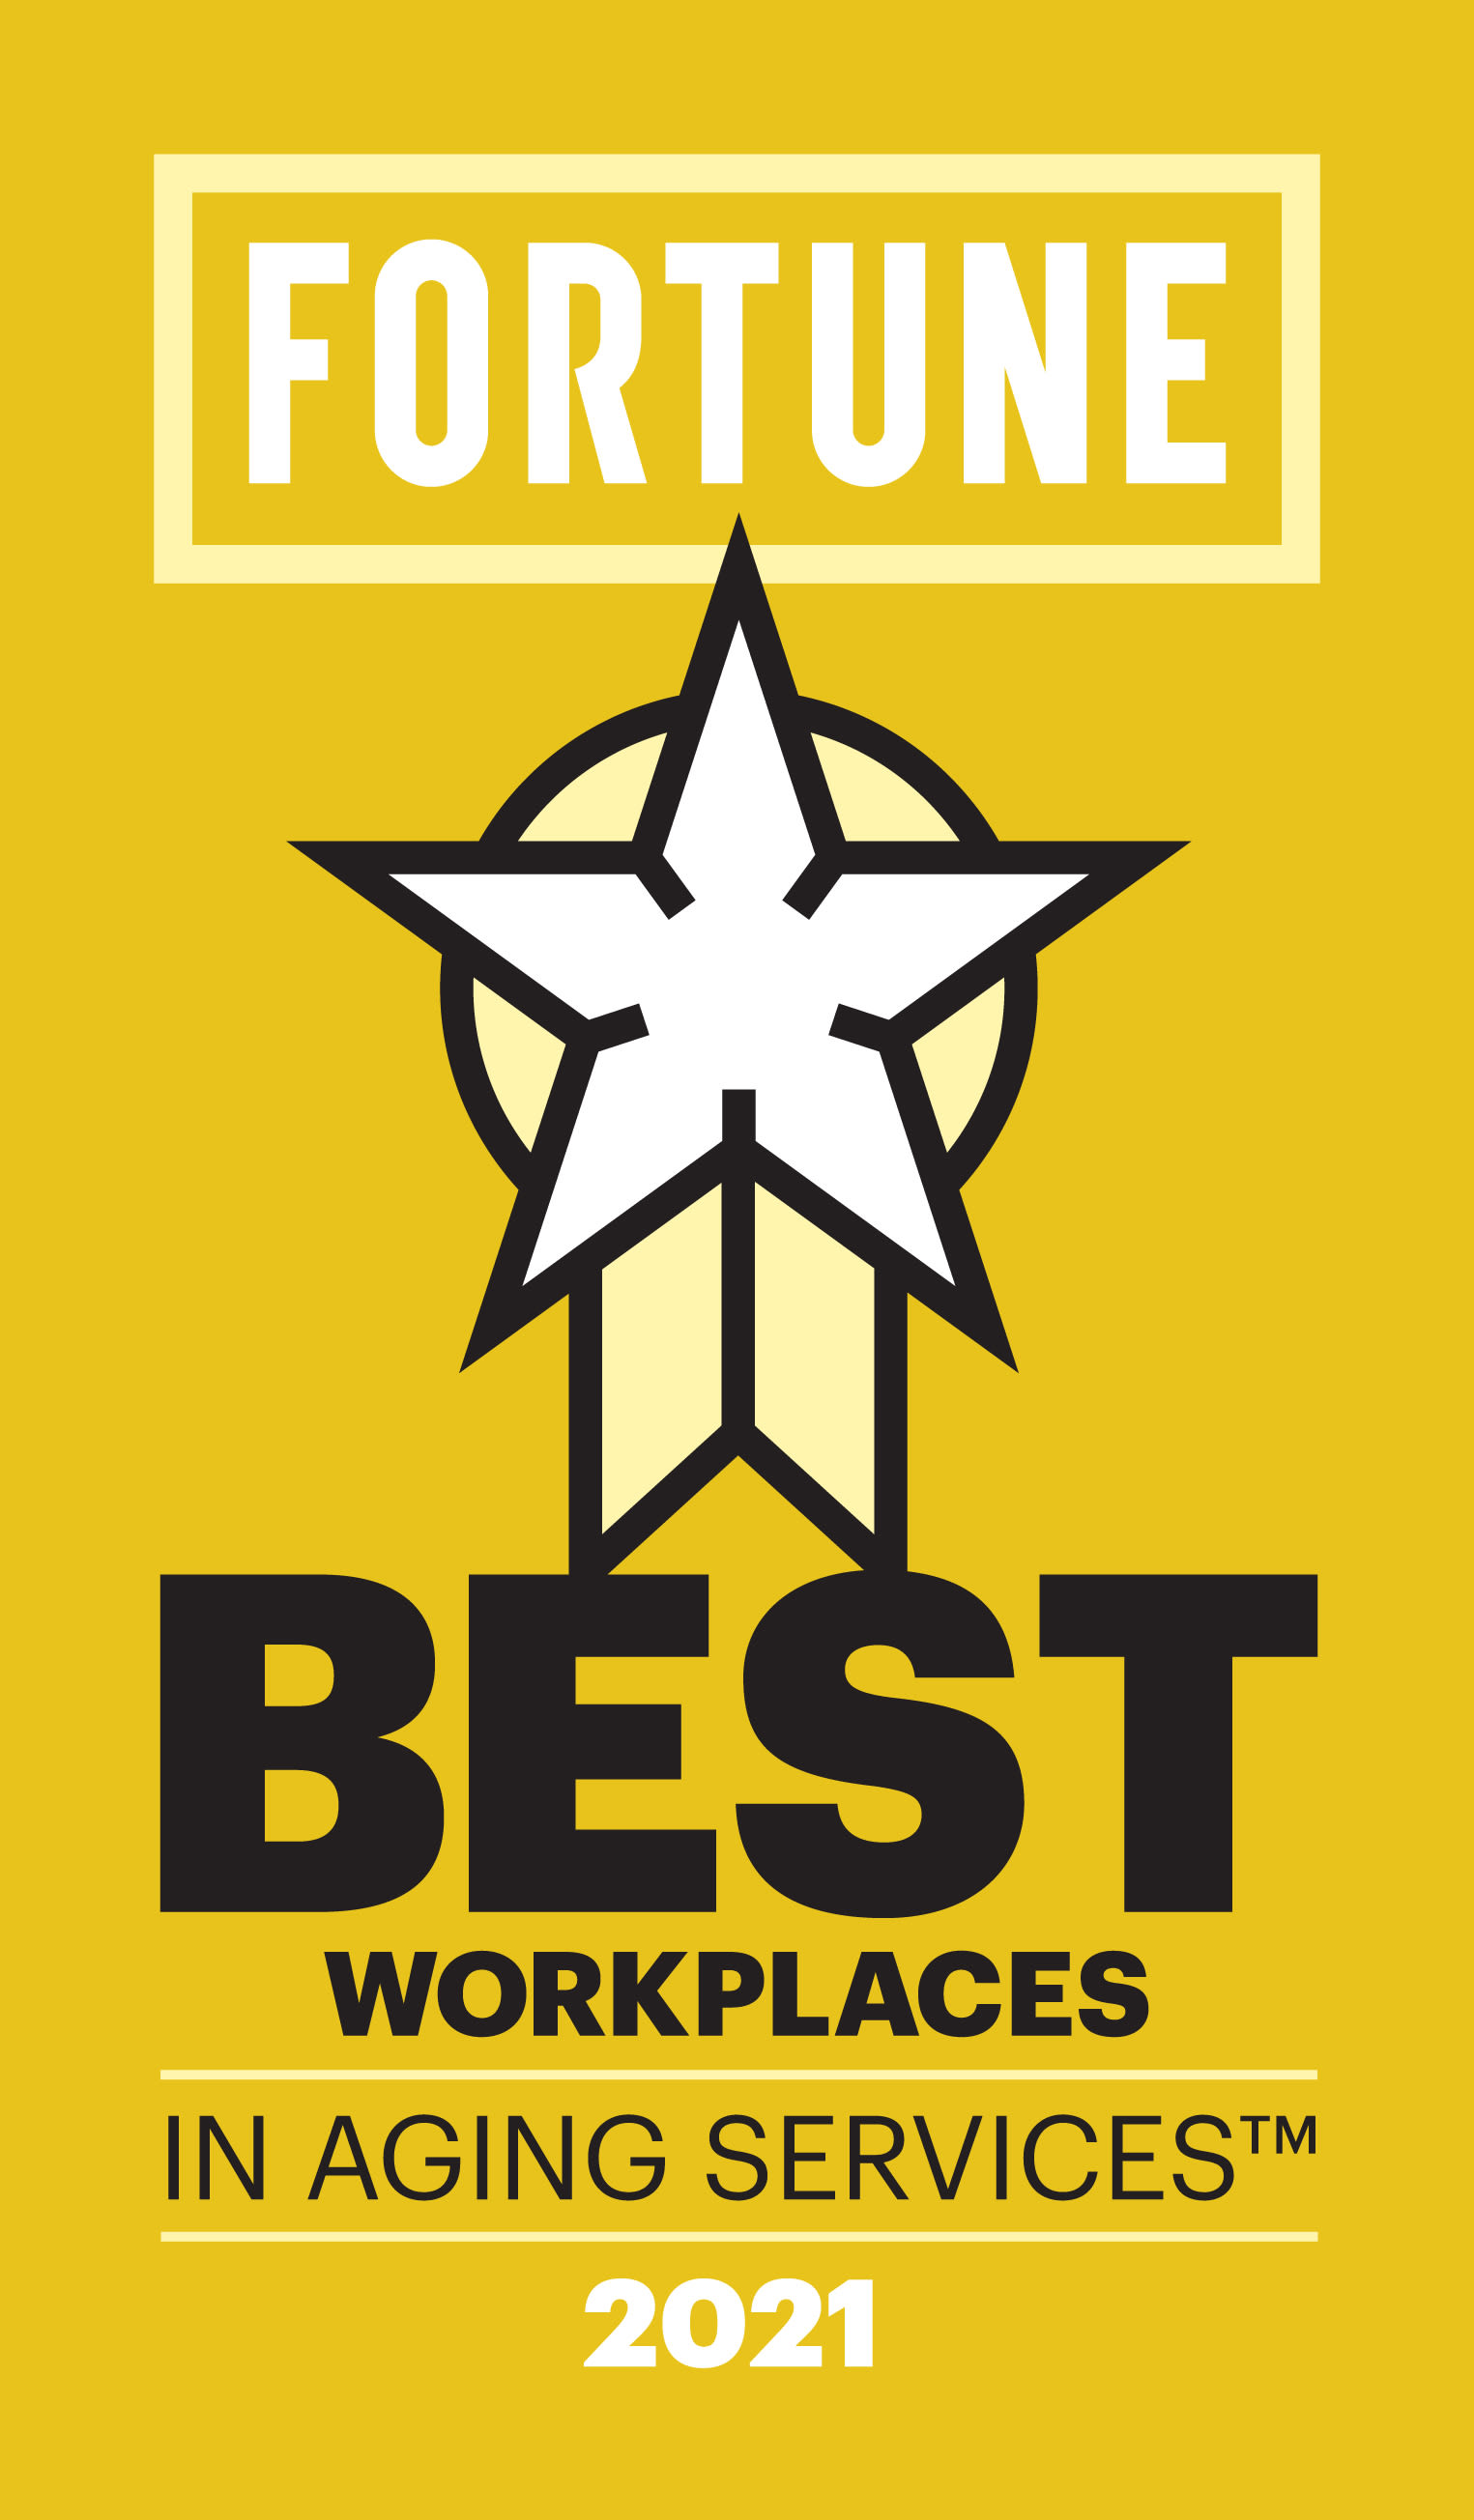 Crystal Terrace of Klamath Falls is one of Fortune's best workplaces for aging services